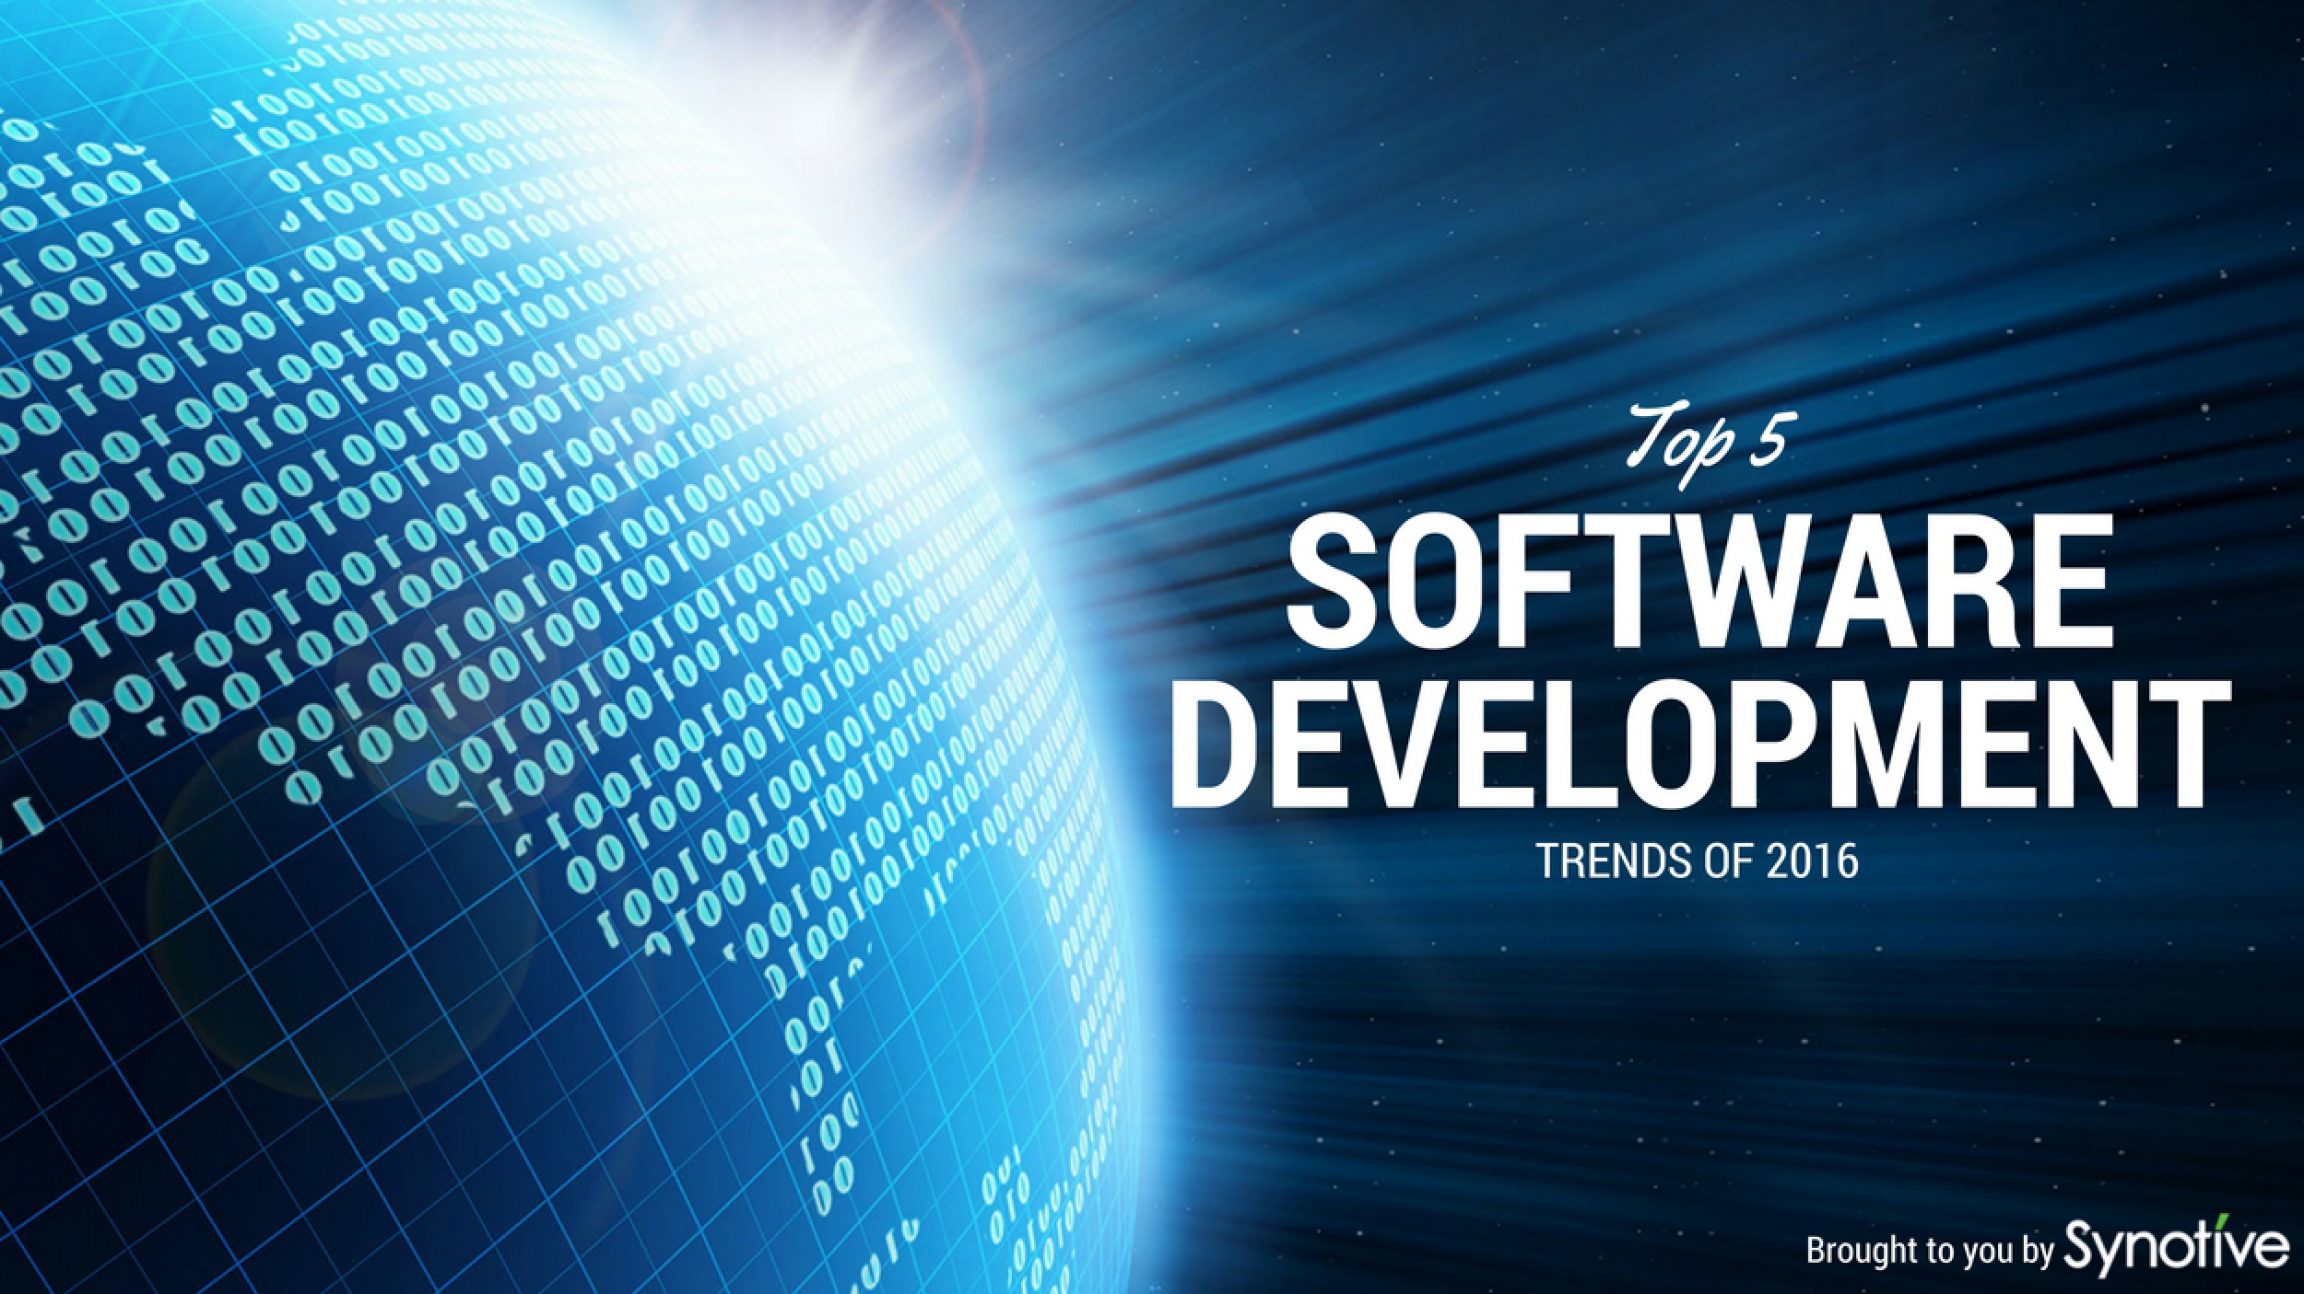 Top 5 Software Development Trends of 2016 Synotive